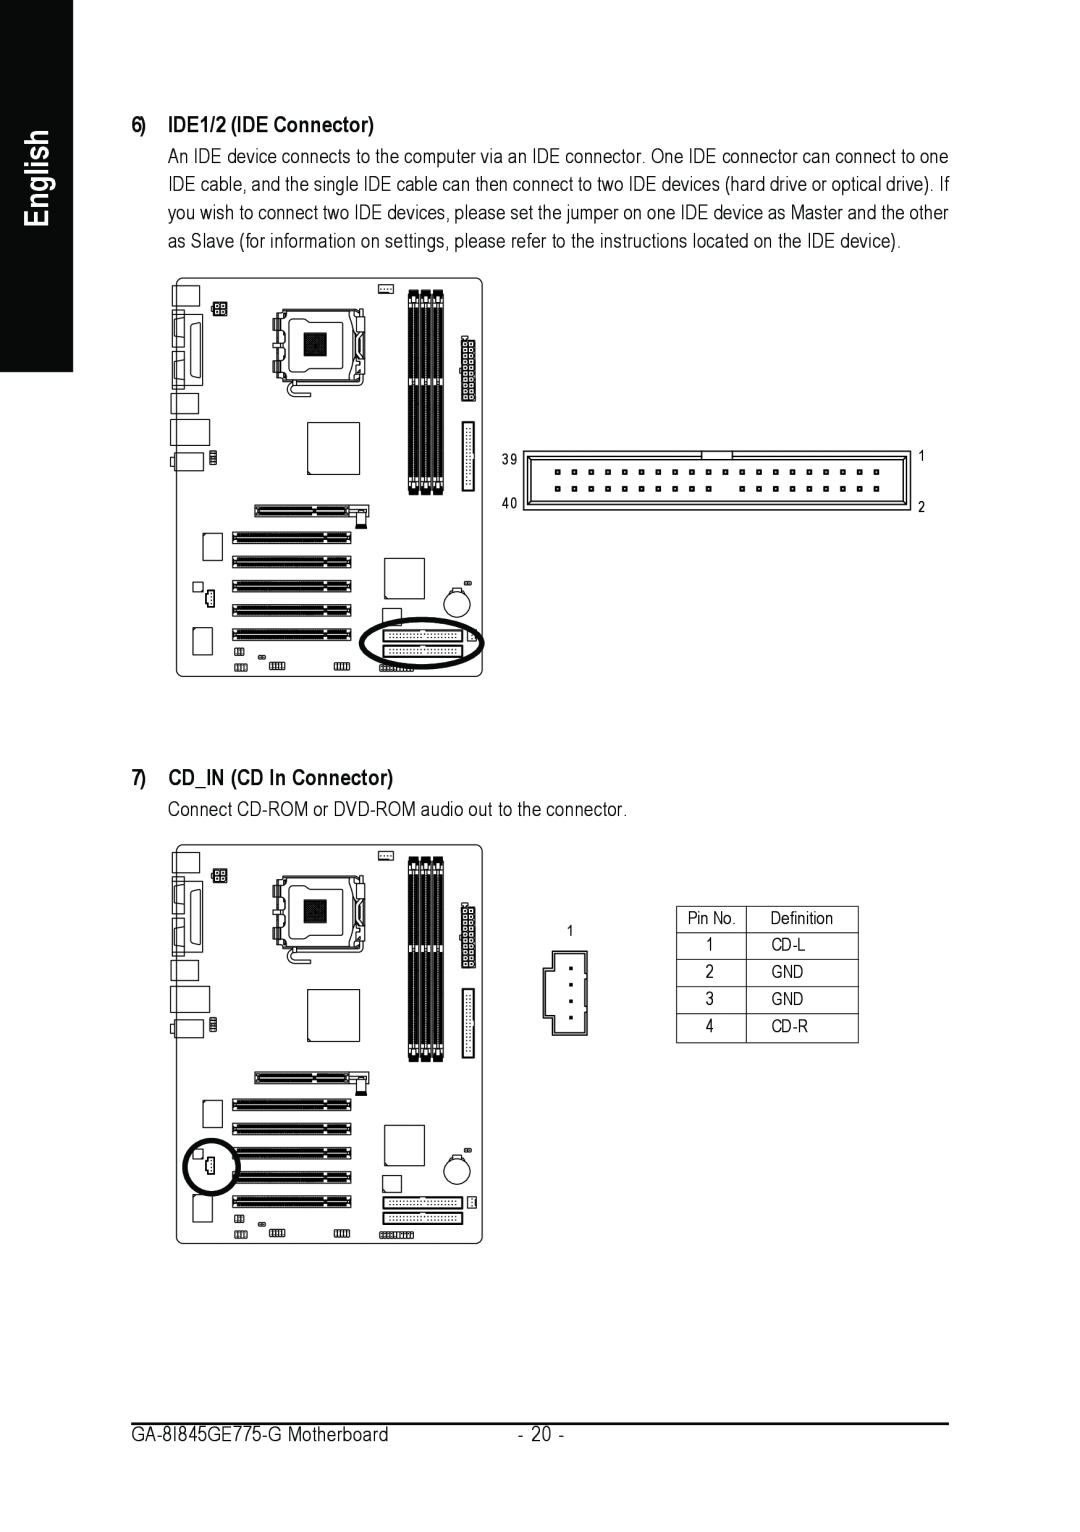 Gigabyte GA-8I845GE775-G user manual 6 IDE1/2 IDE Connector, CDIN CD In Connector, English, Pin No, Definition, Cd-L, Cd-R 